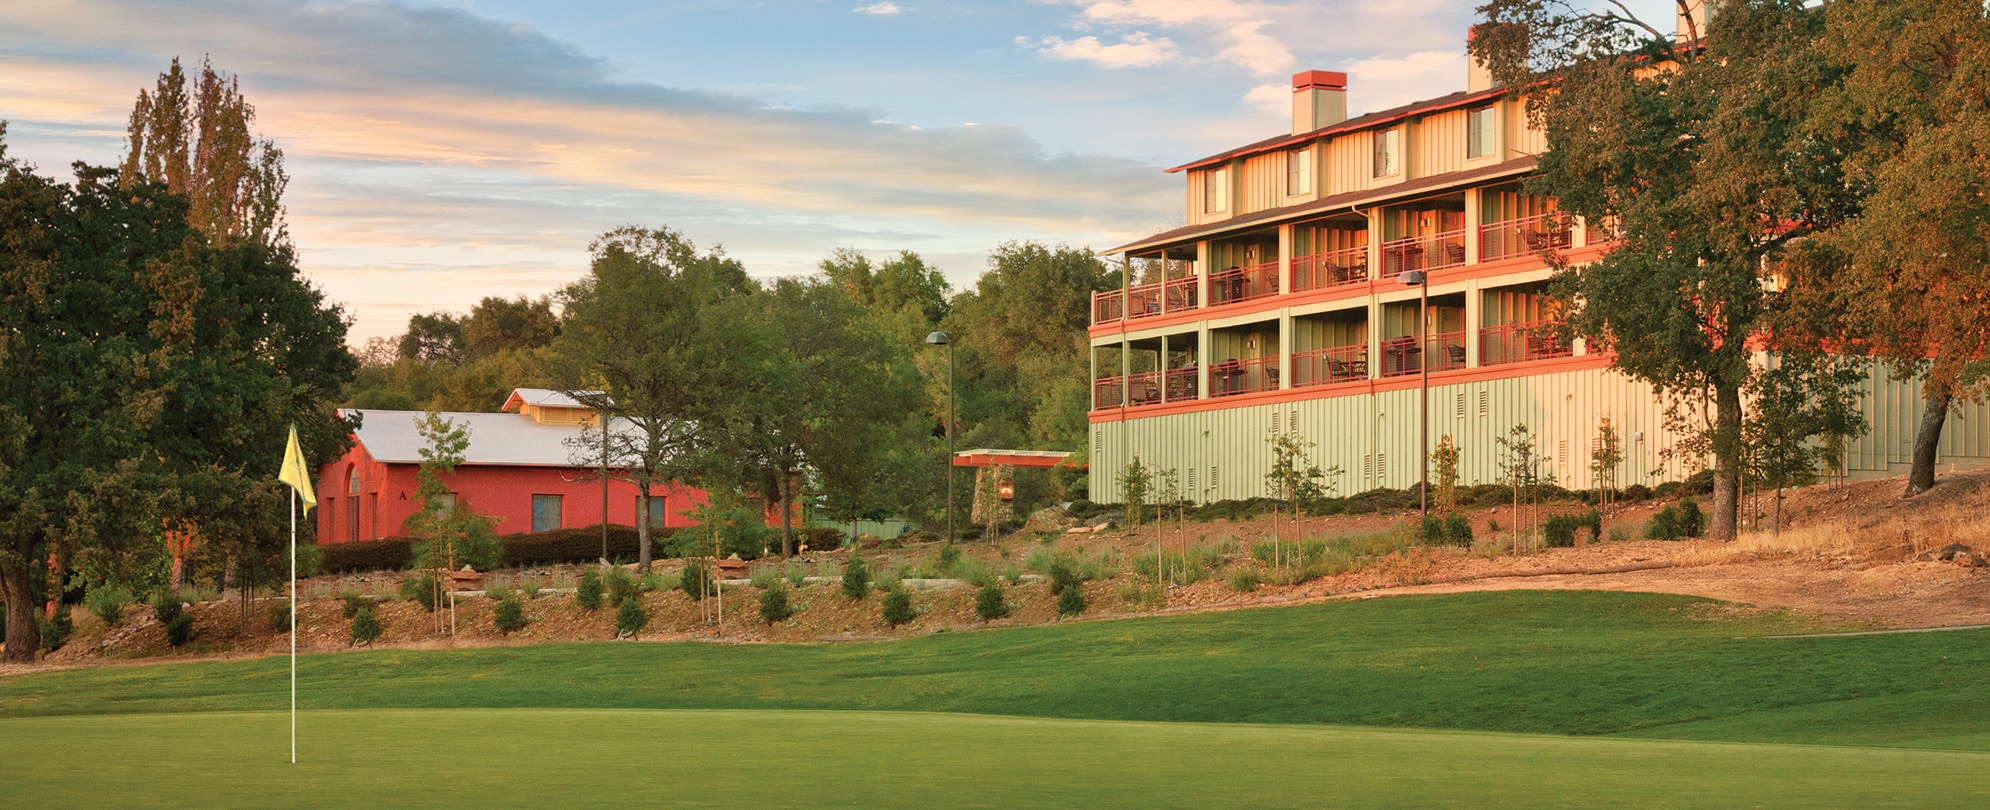 The Greenhorn Creek Golf Course and exterior of WorldMark Angels Camp, a timeshare resort in California.